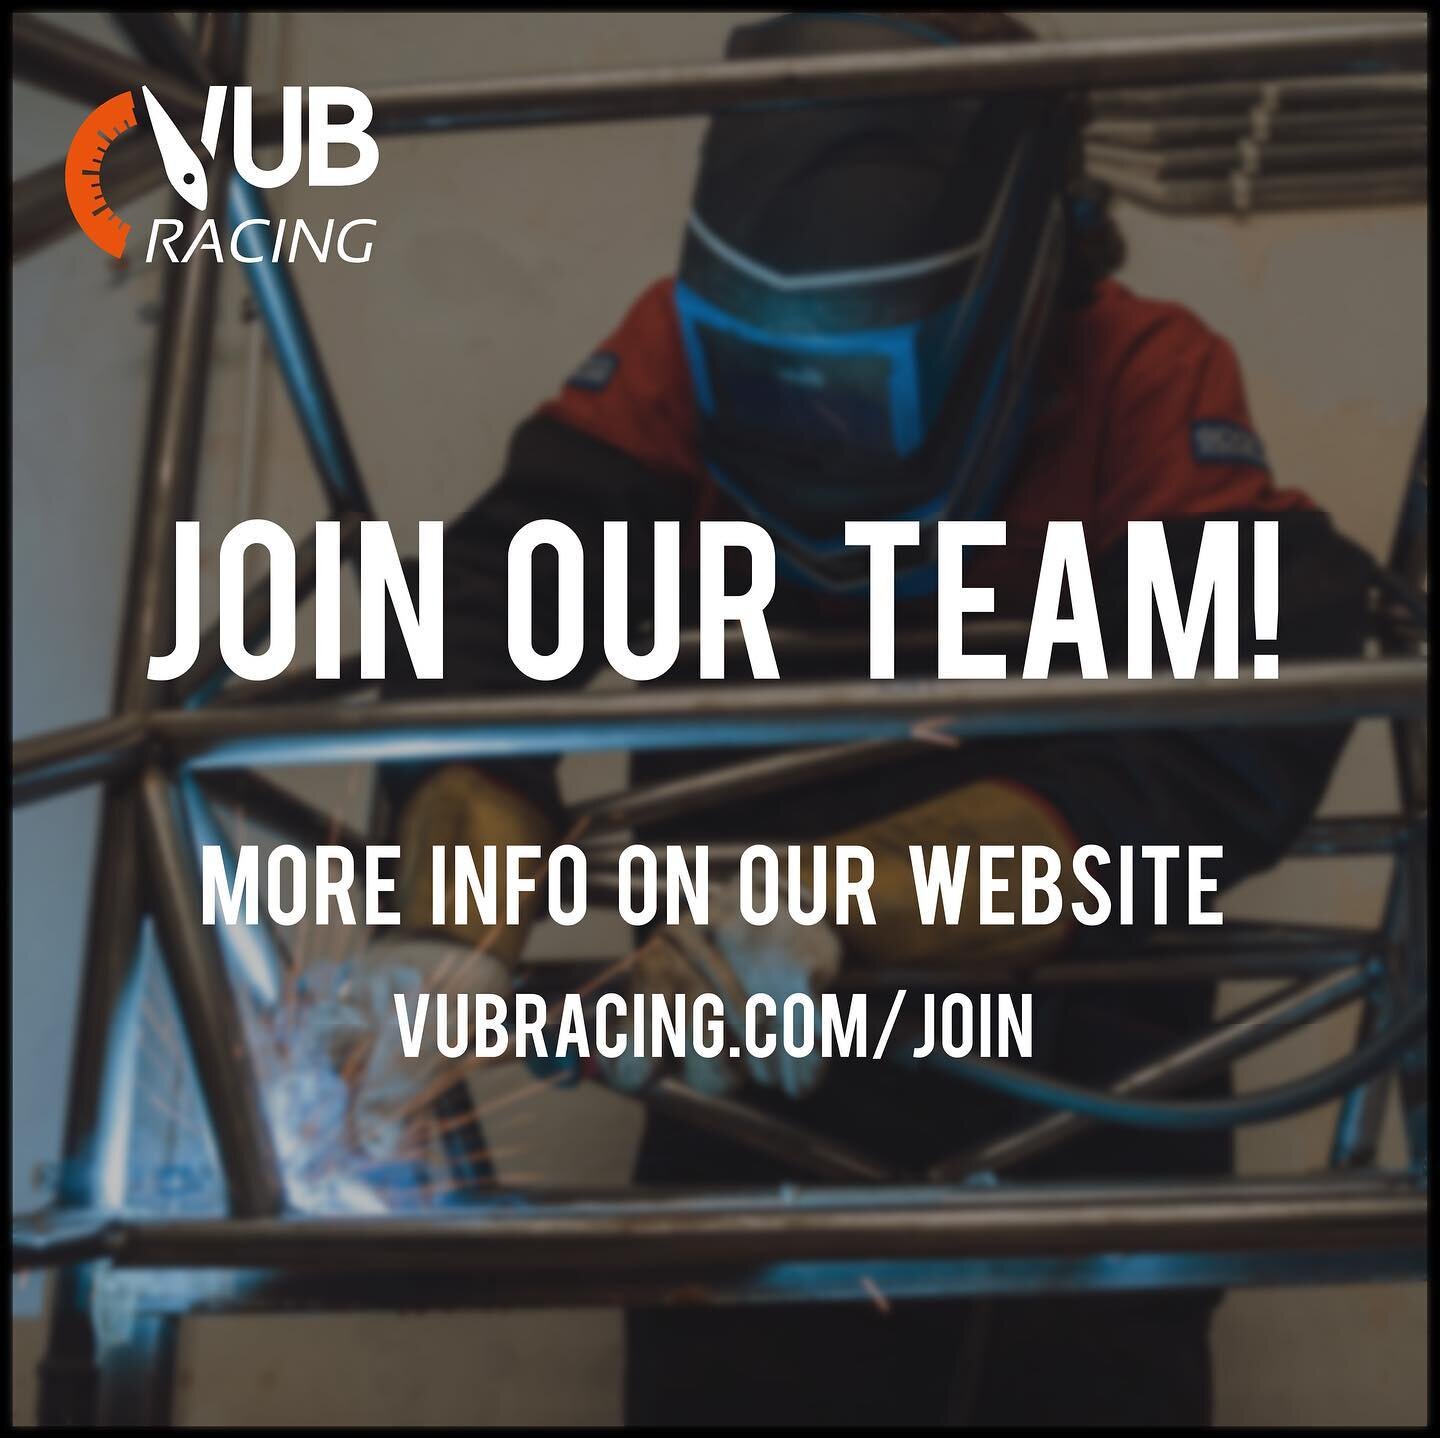 ❗️We want you! ❗️

Are you passionate about racing and have you always wanted to be a part of a student race team?
Here's your chance! Head over to our website for more information.

🔽🔽🔽
vubracing.com/join

Let's roll! 🐢 

#vubracing #vub #brusse